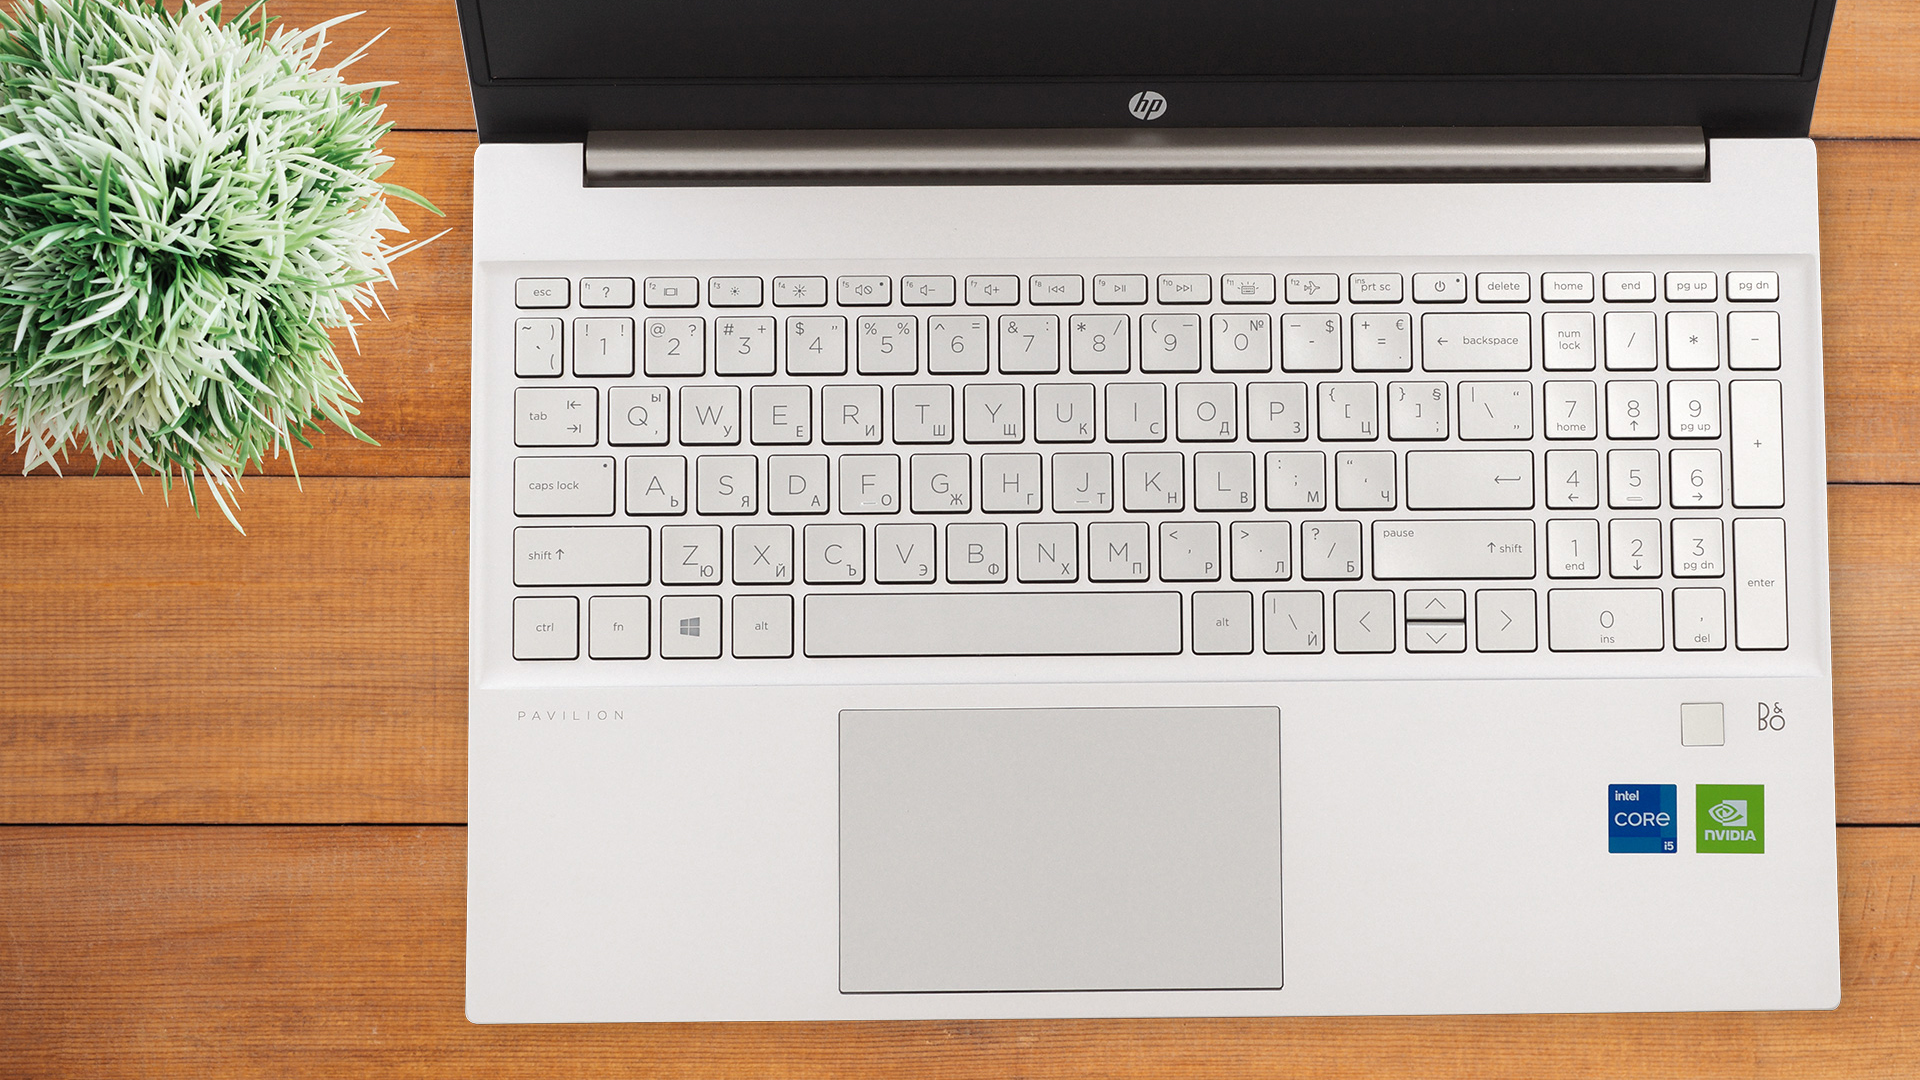 HP Pavilion 15 (15-eg0000) review - an ordinary device for